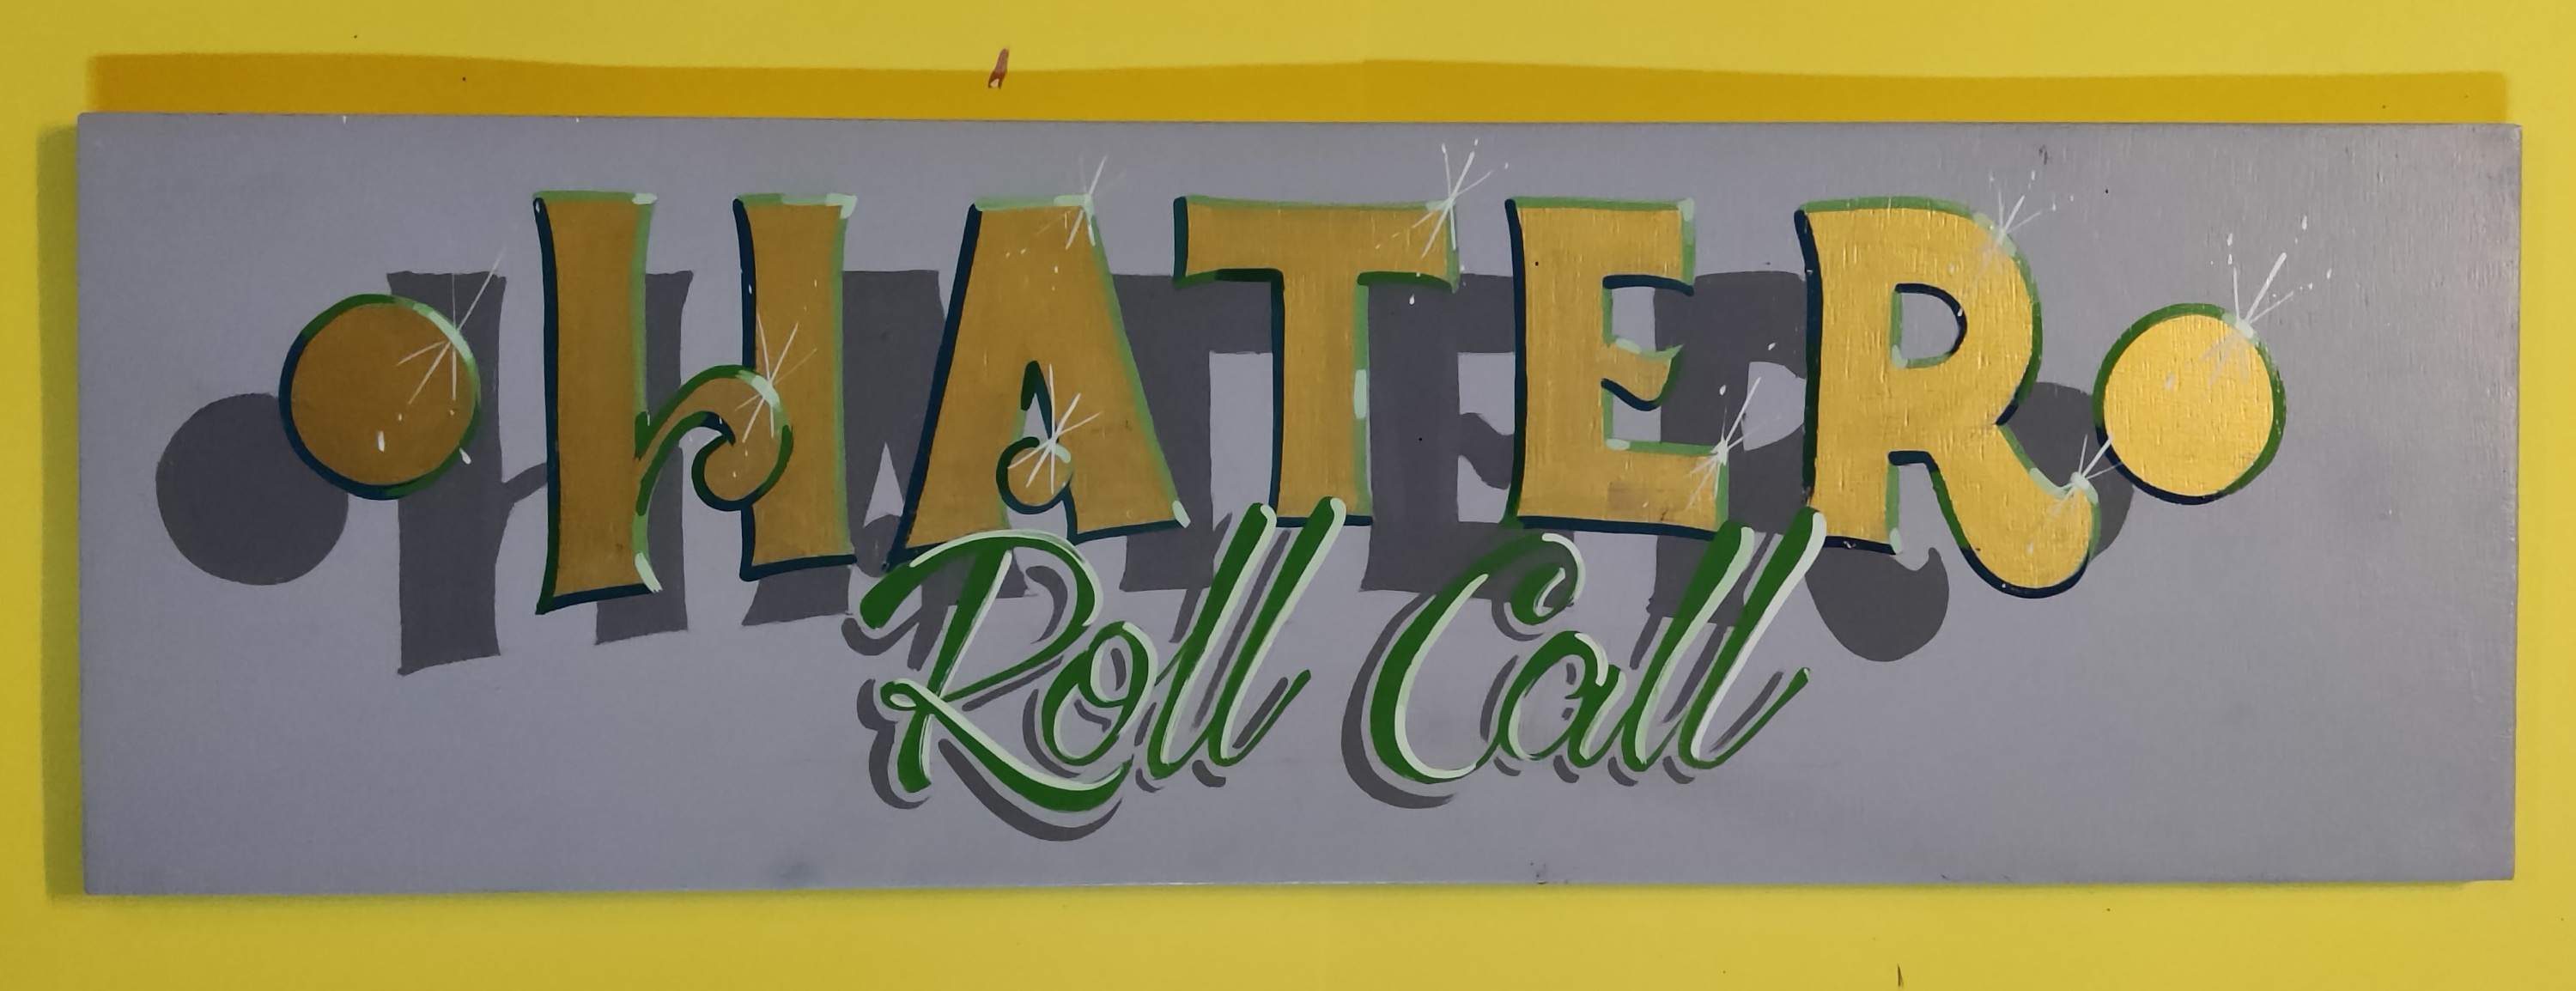 'Hater Roll Call' faux-relief metallic enamel wooden panel. 60x22cm